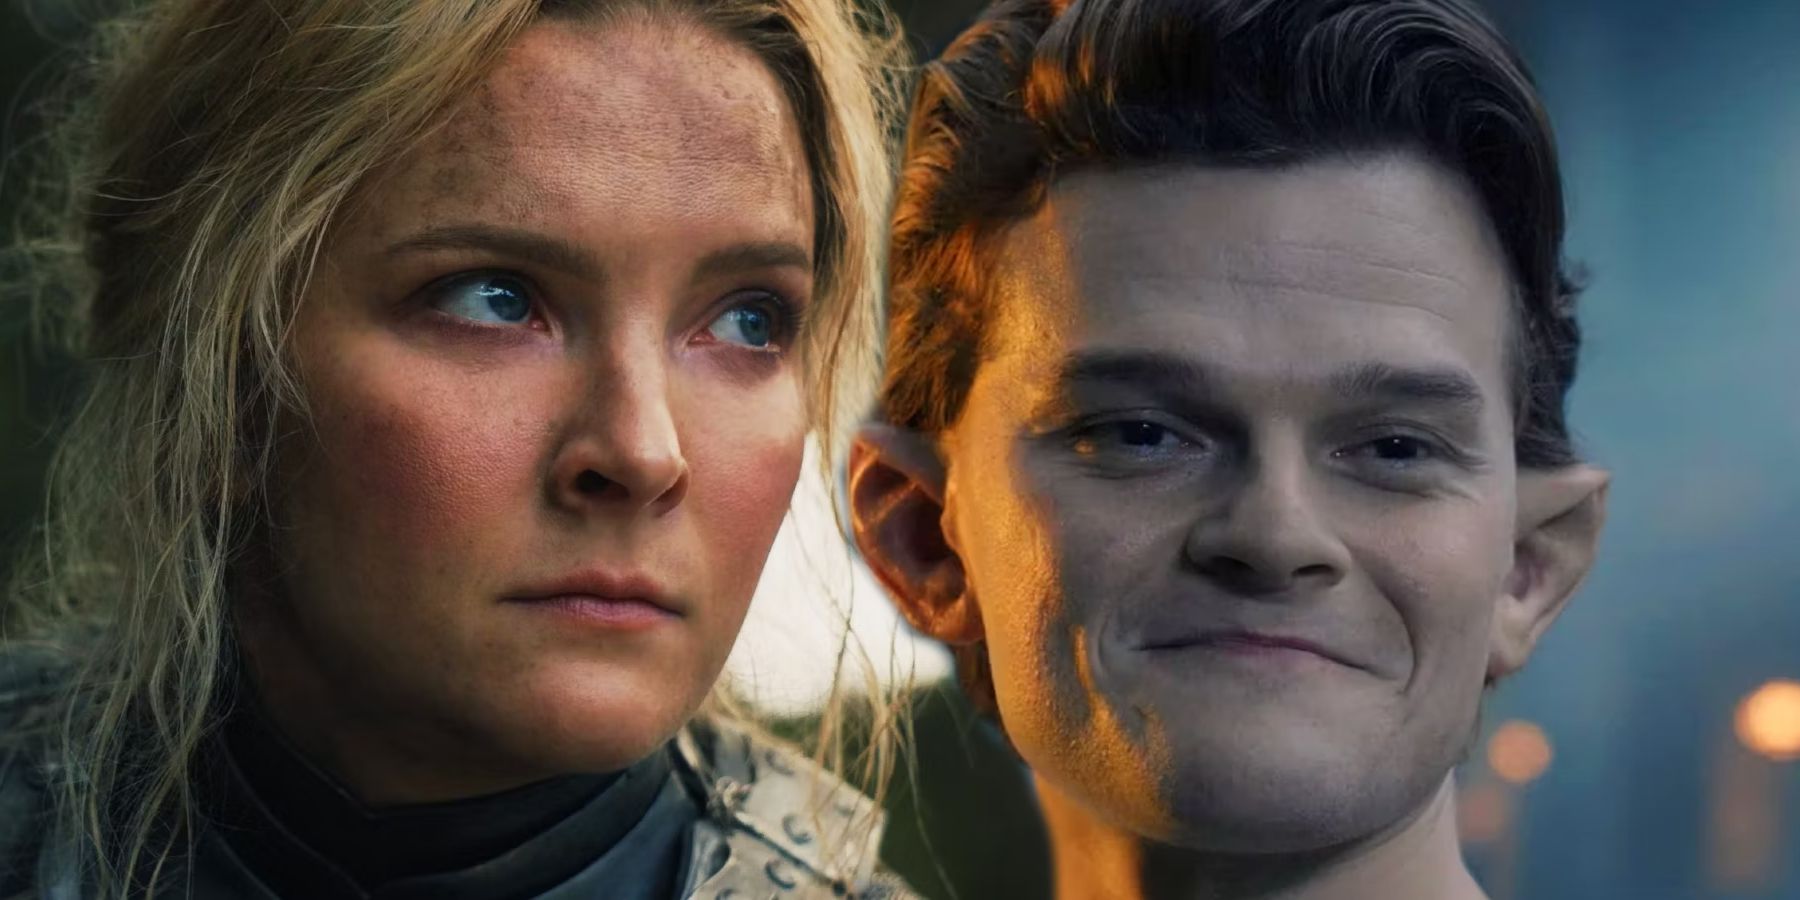 Morfydd Clark as Galadriel looking serious and Robert Aramayo as Elrond looking down while smiling in The Rings of Power